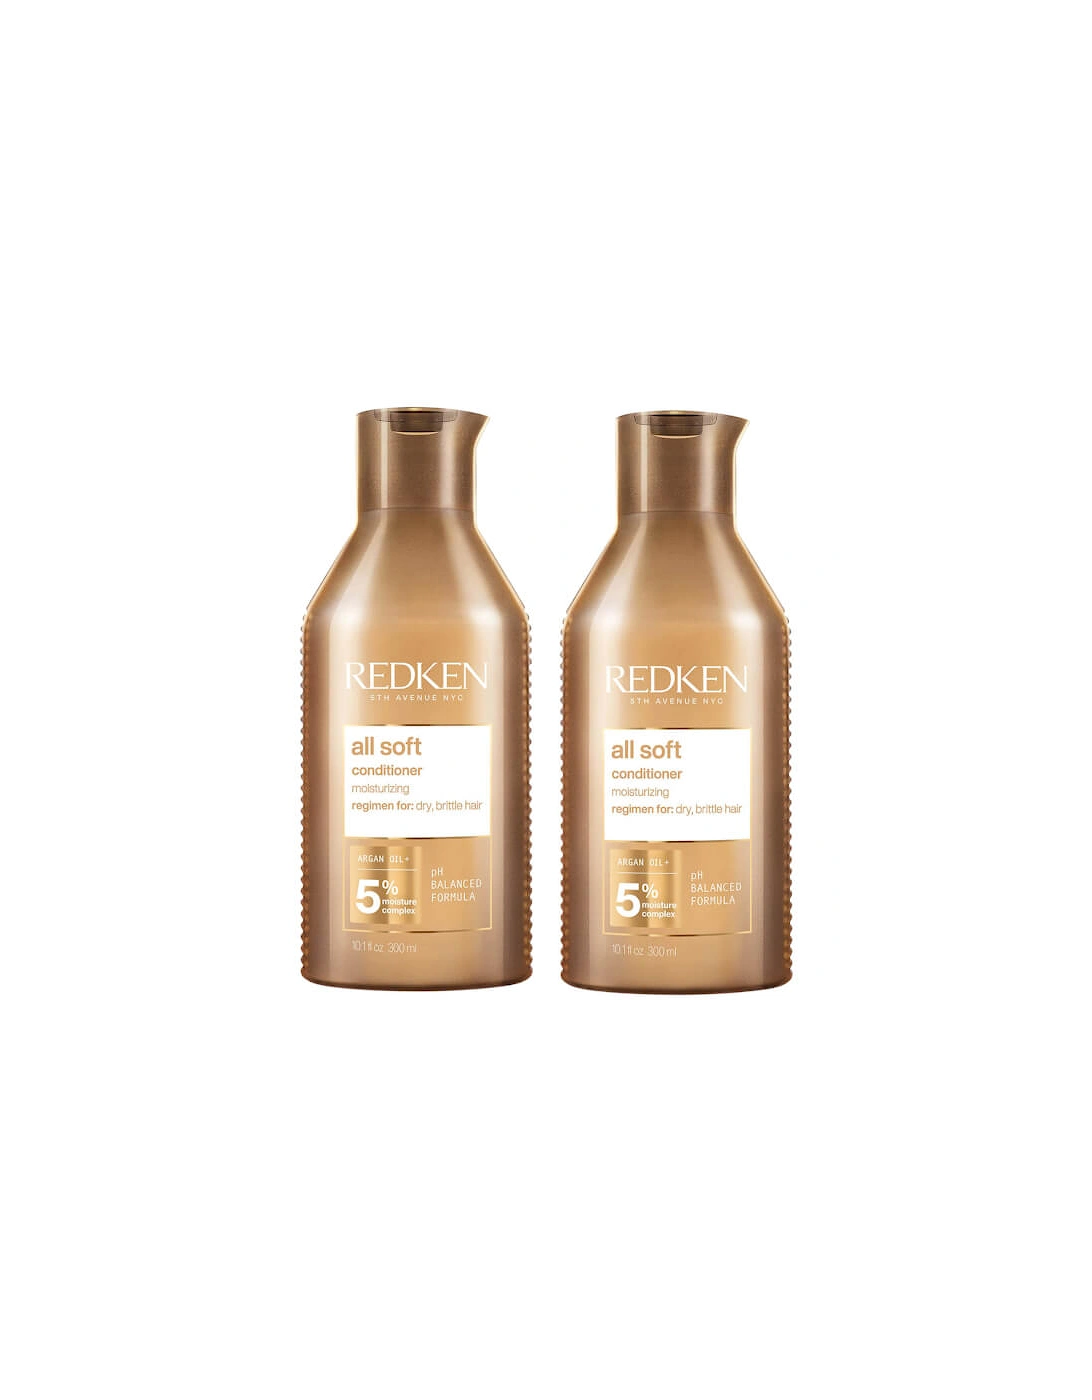 All Soft Conditioner Duo (2 x 250ml) - Redken, 2 of 1